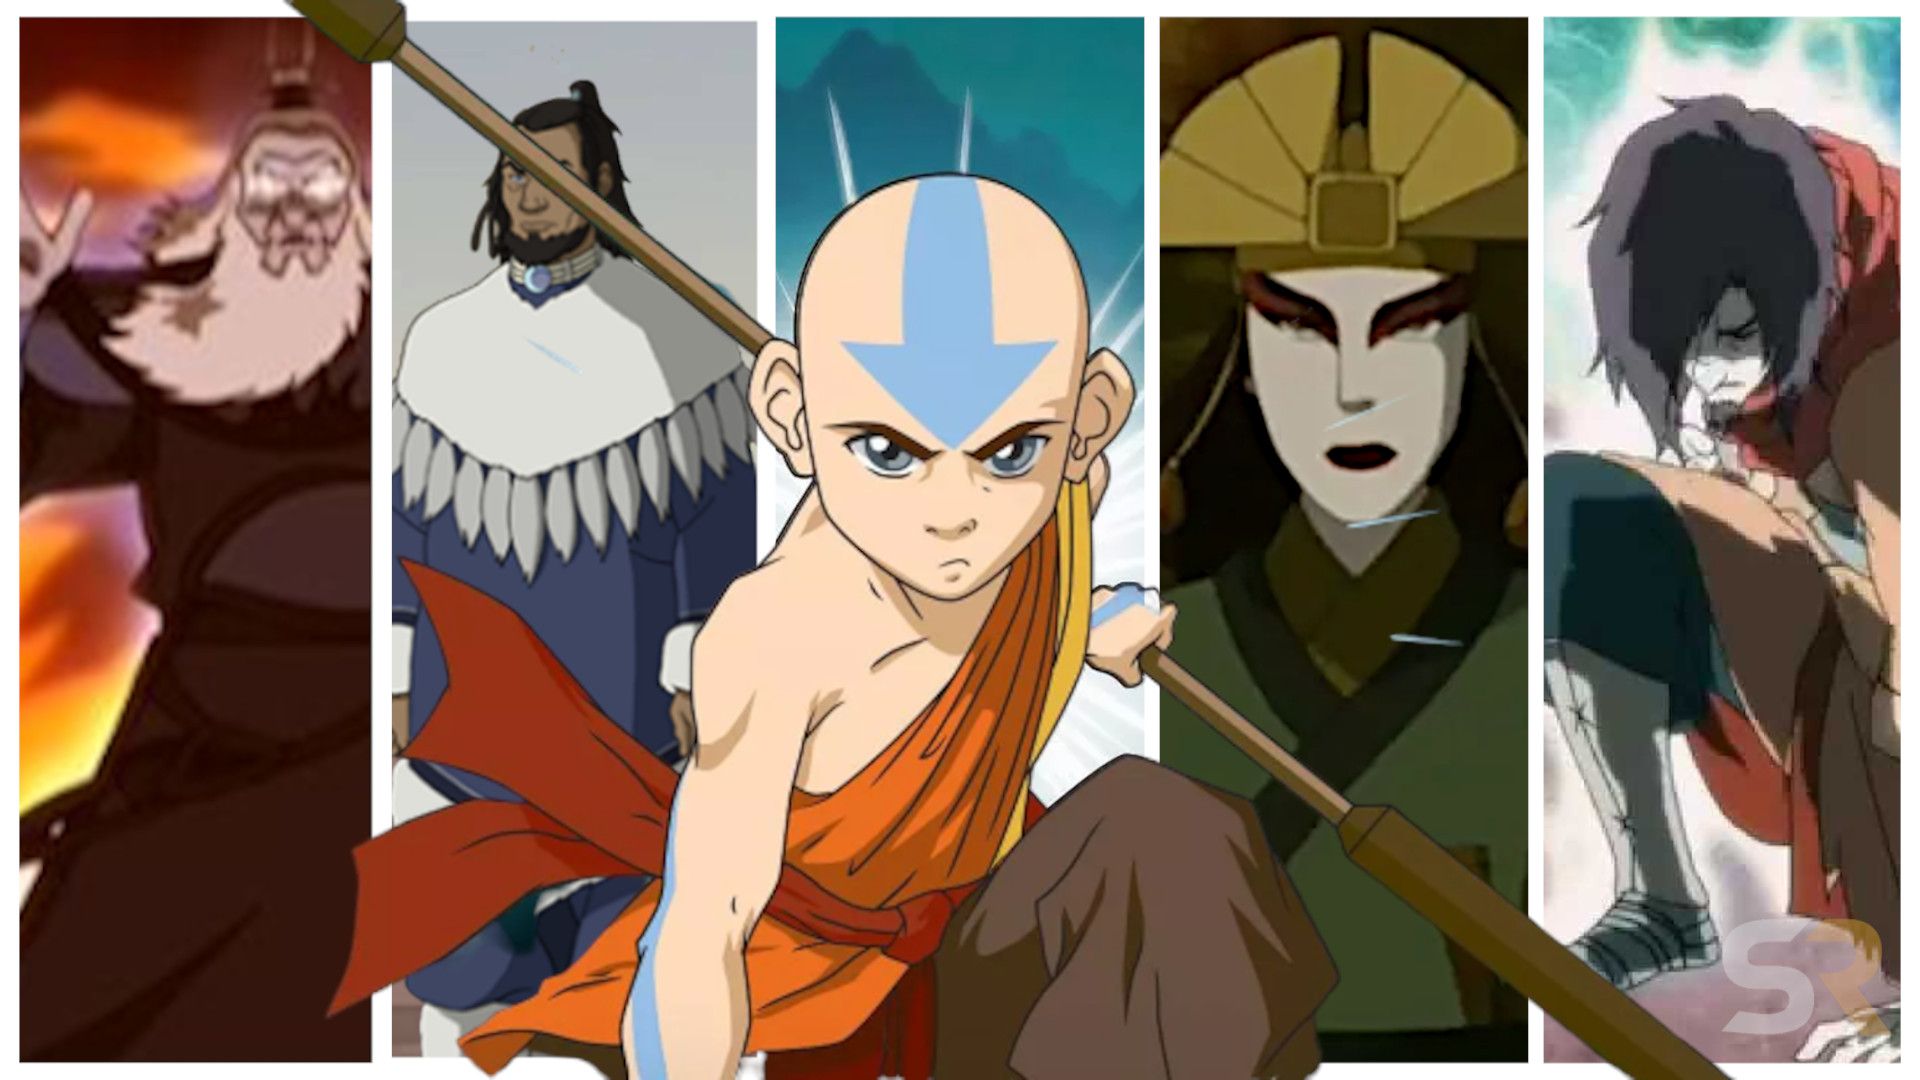 Anyone else want a mini series on Kuruk I feel like no one really likes  him but seems really cool from what we know about him to me   rTheLastAirbender